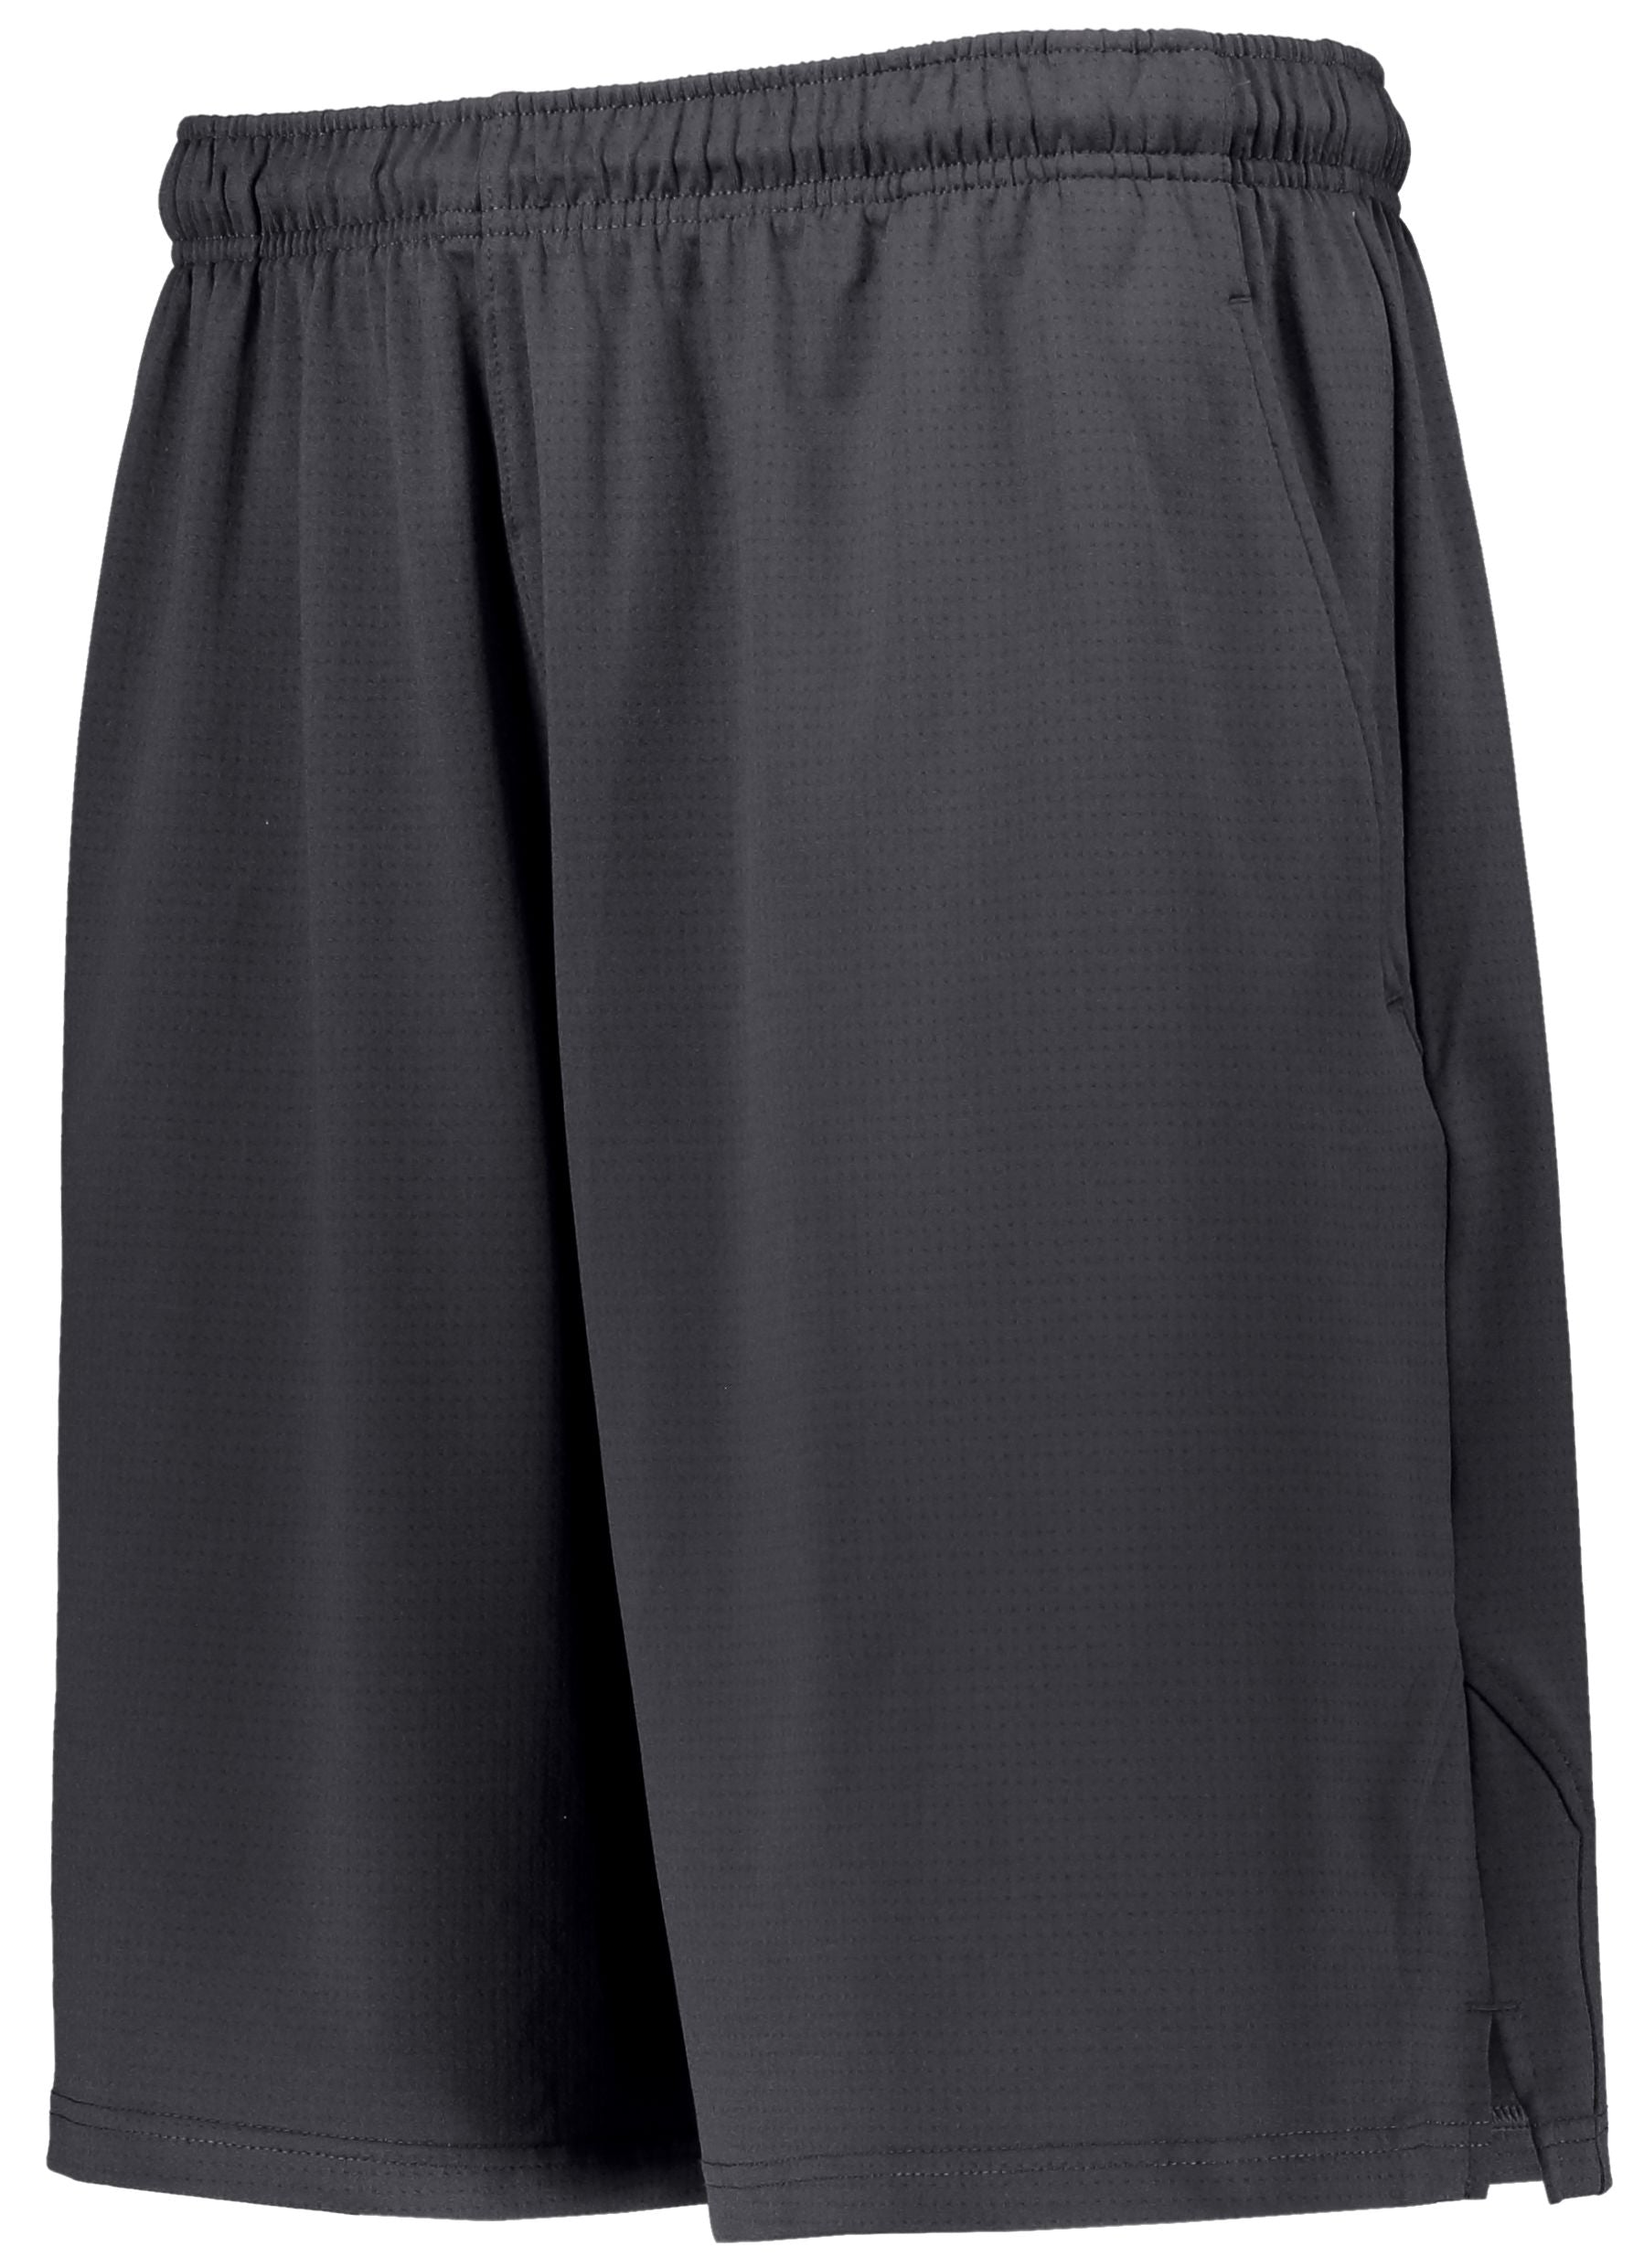 Russell Athletic Team Driven Coaches Shorts in Stealth  -Part of the Adult, Adult-Shorts, Russell-Athletic-Products product lines at KanaleyCreations.com